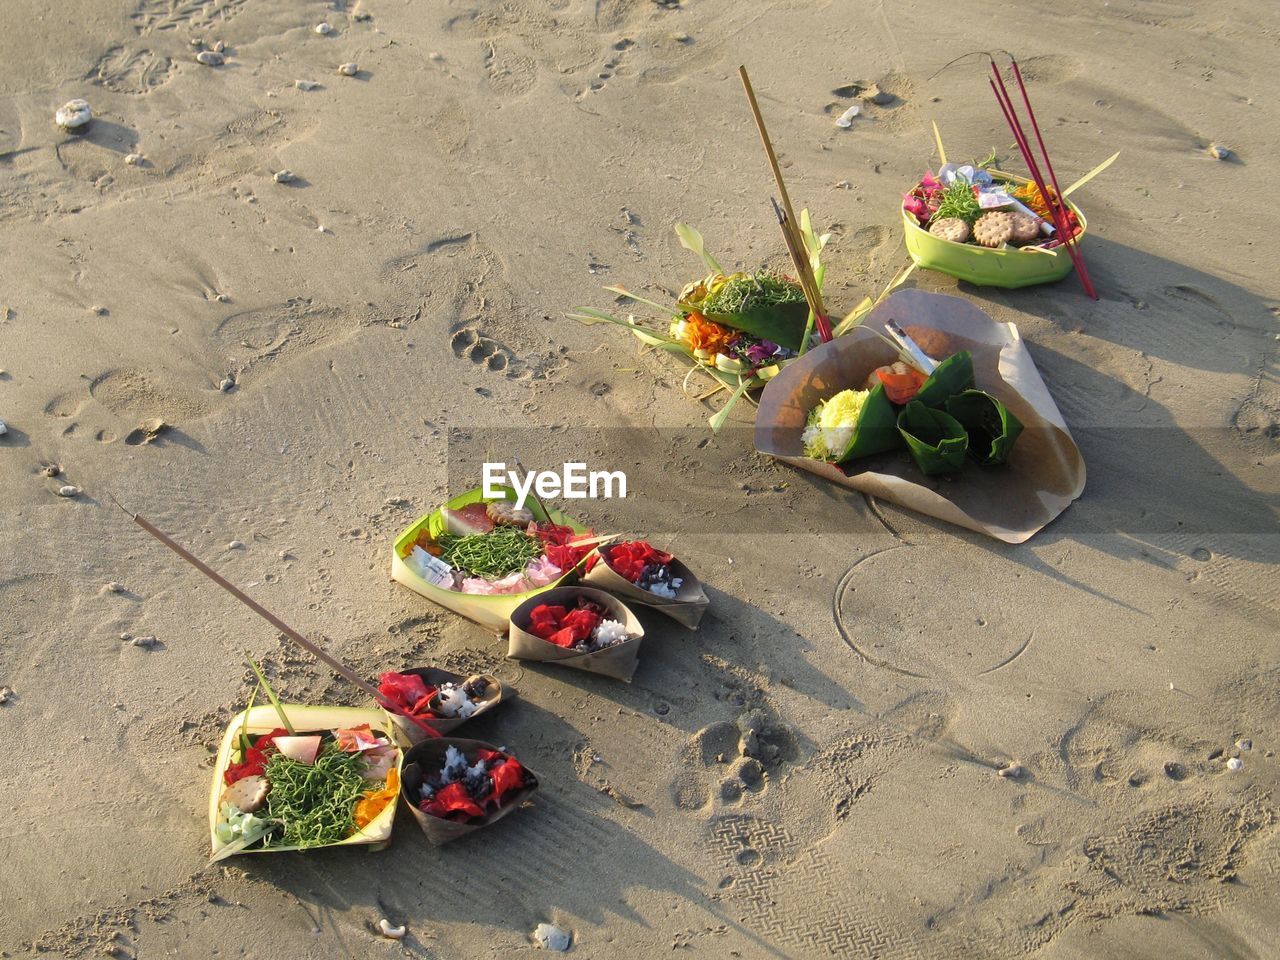 High angle view of buddhist offering on sand at beach